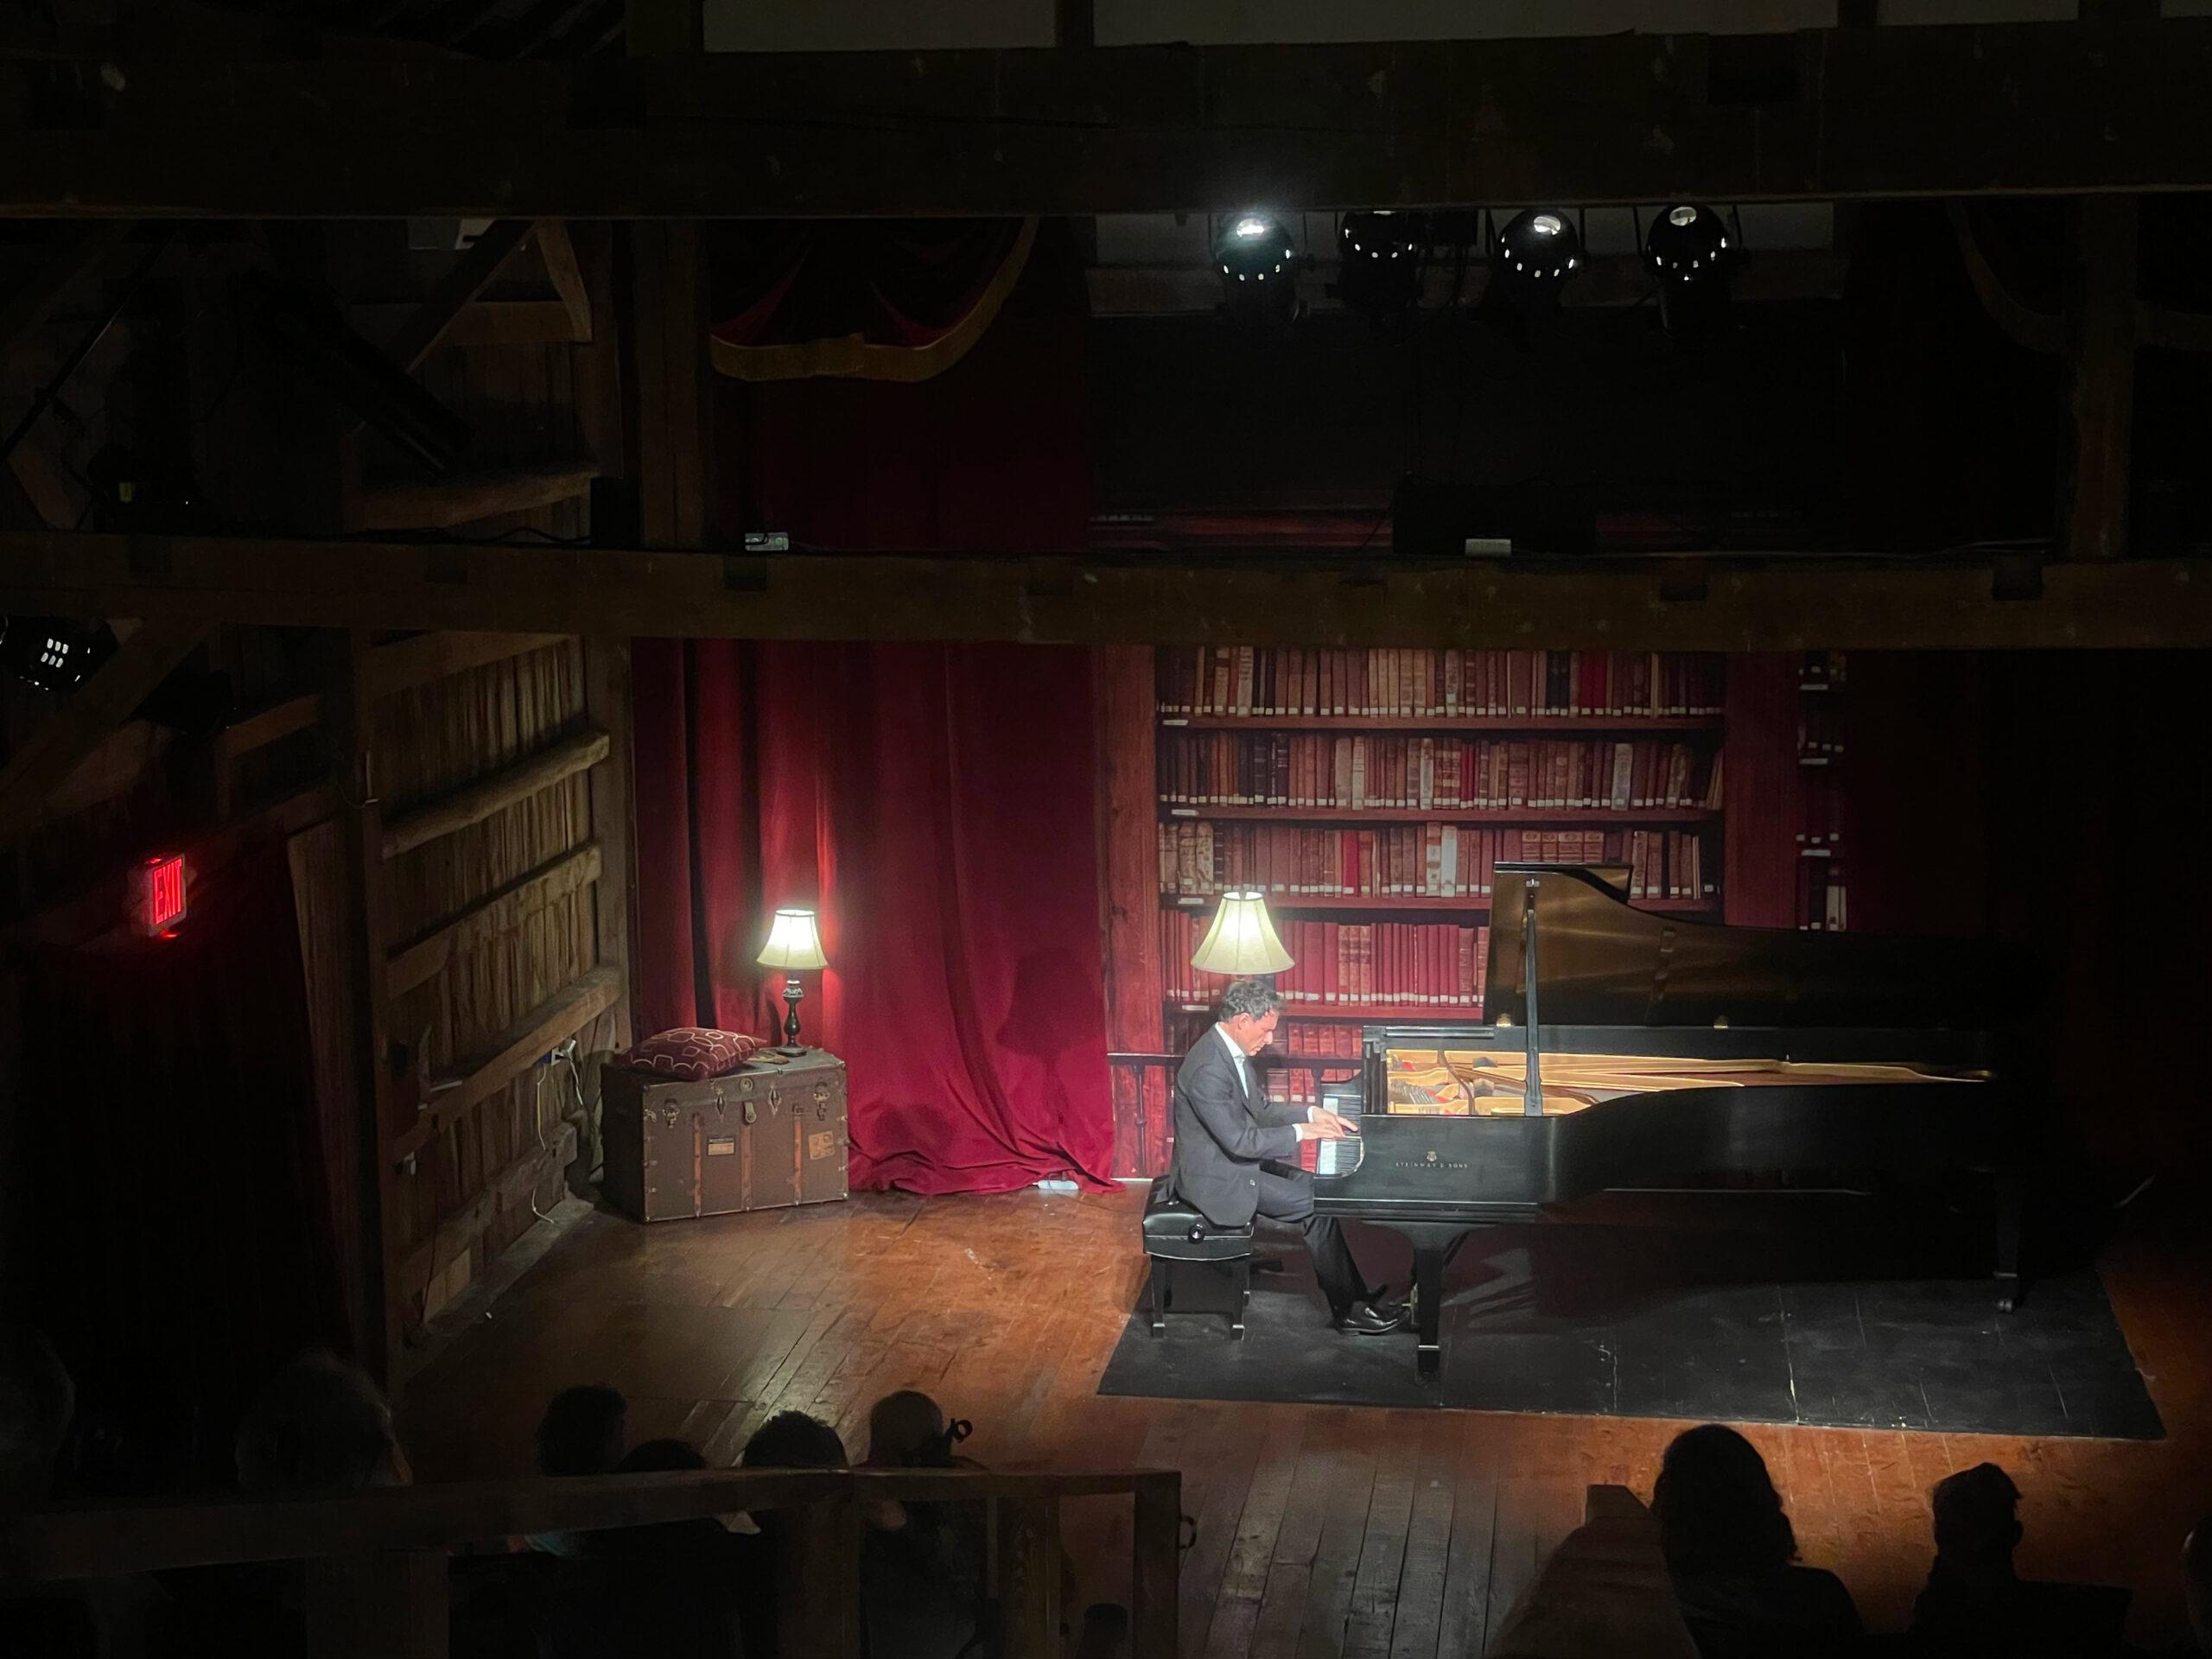 BARN Opera expands musical offerings